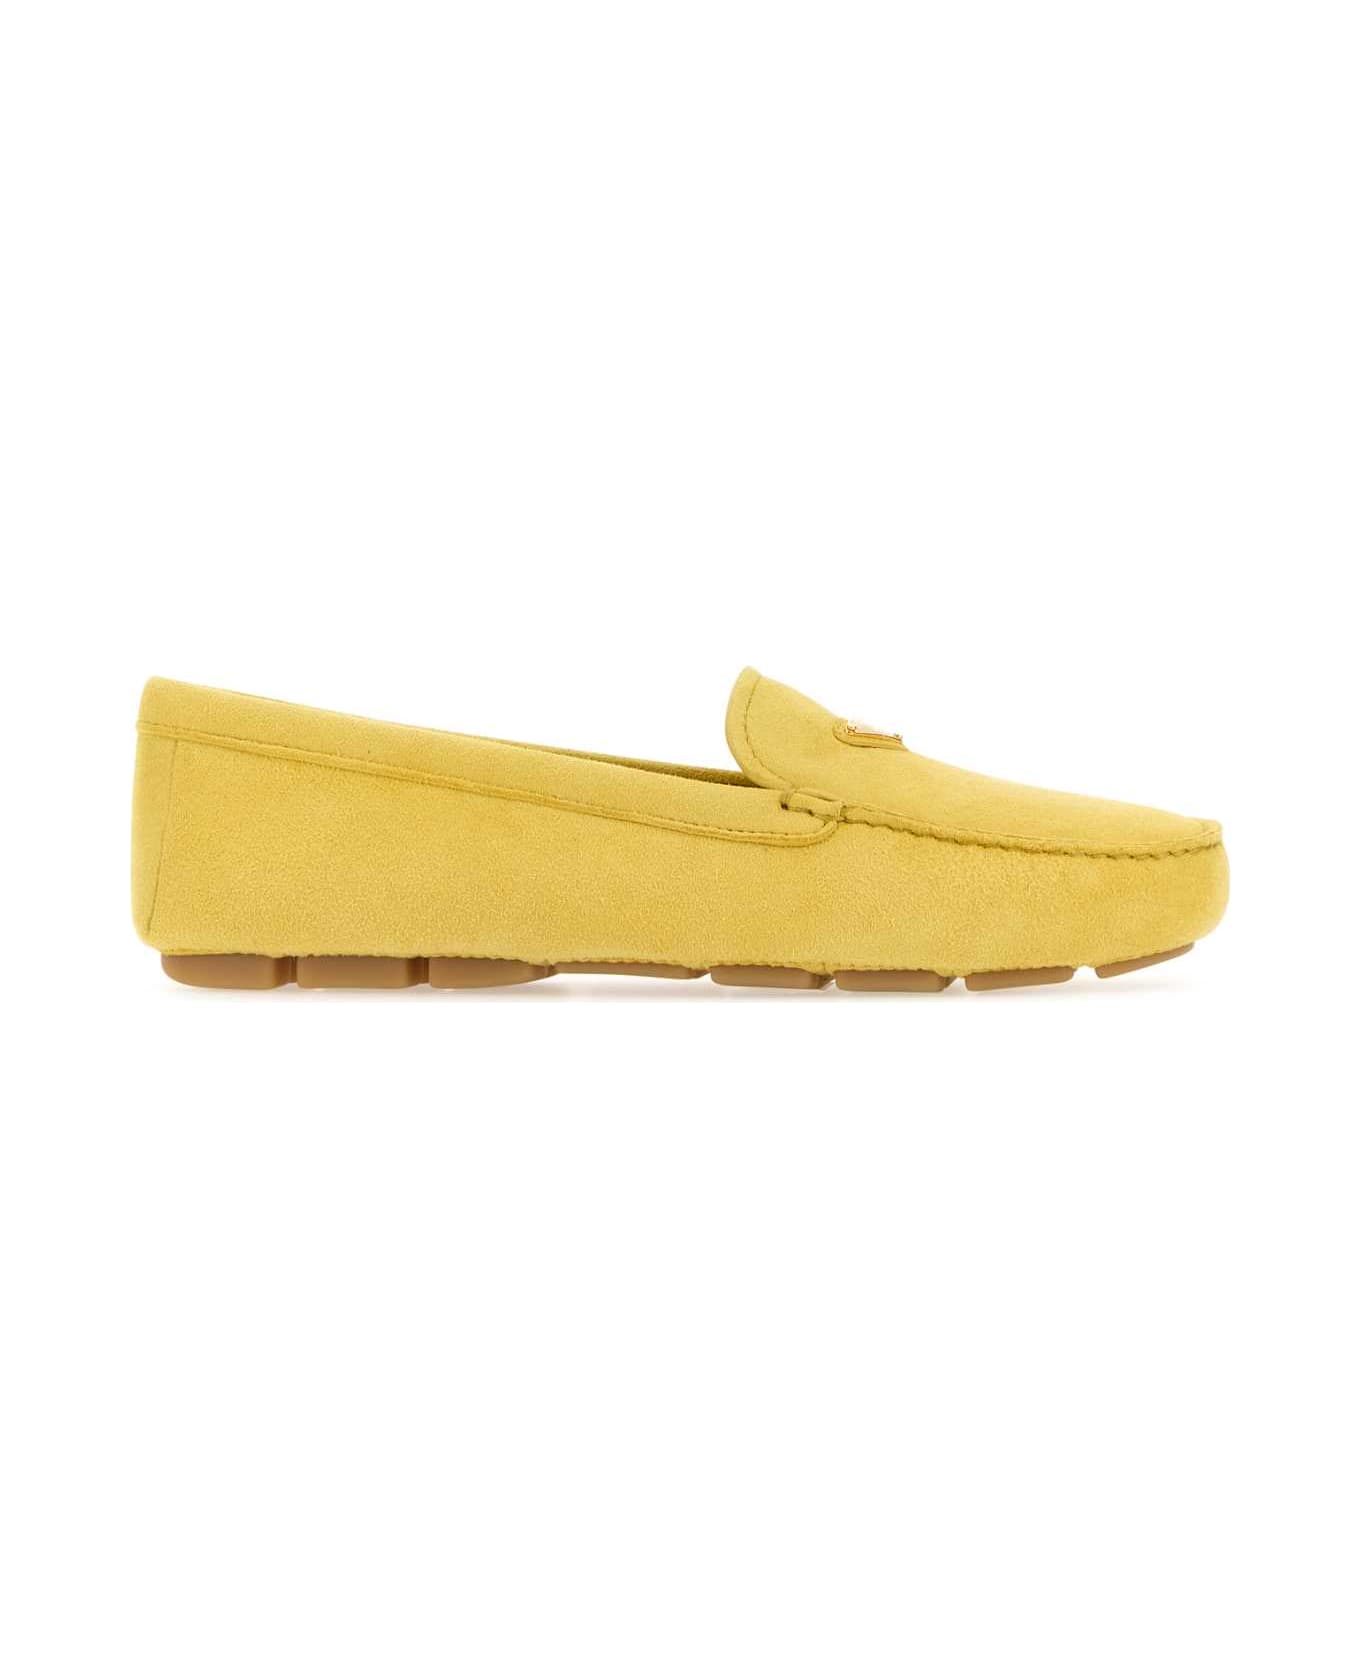 Prada Yellow Suede Loafers - SOLE